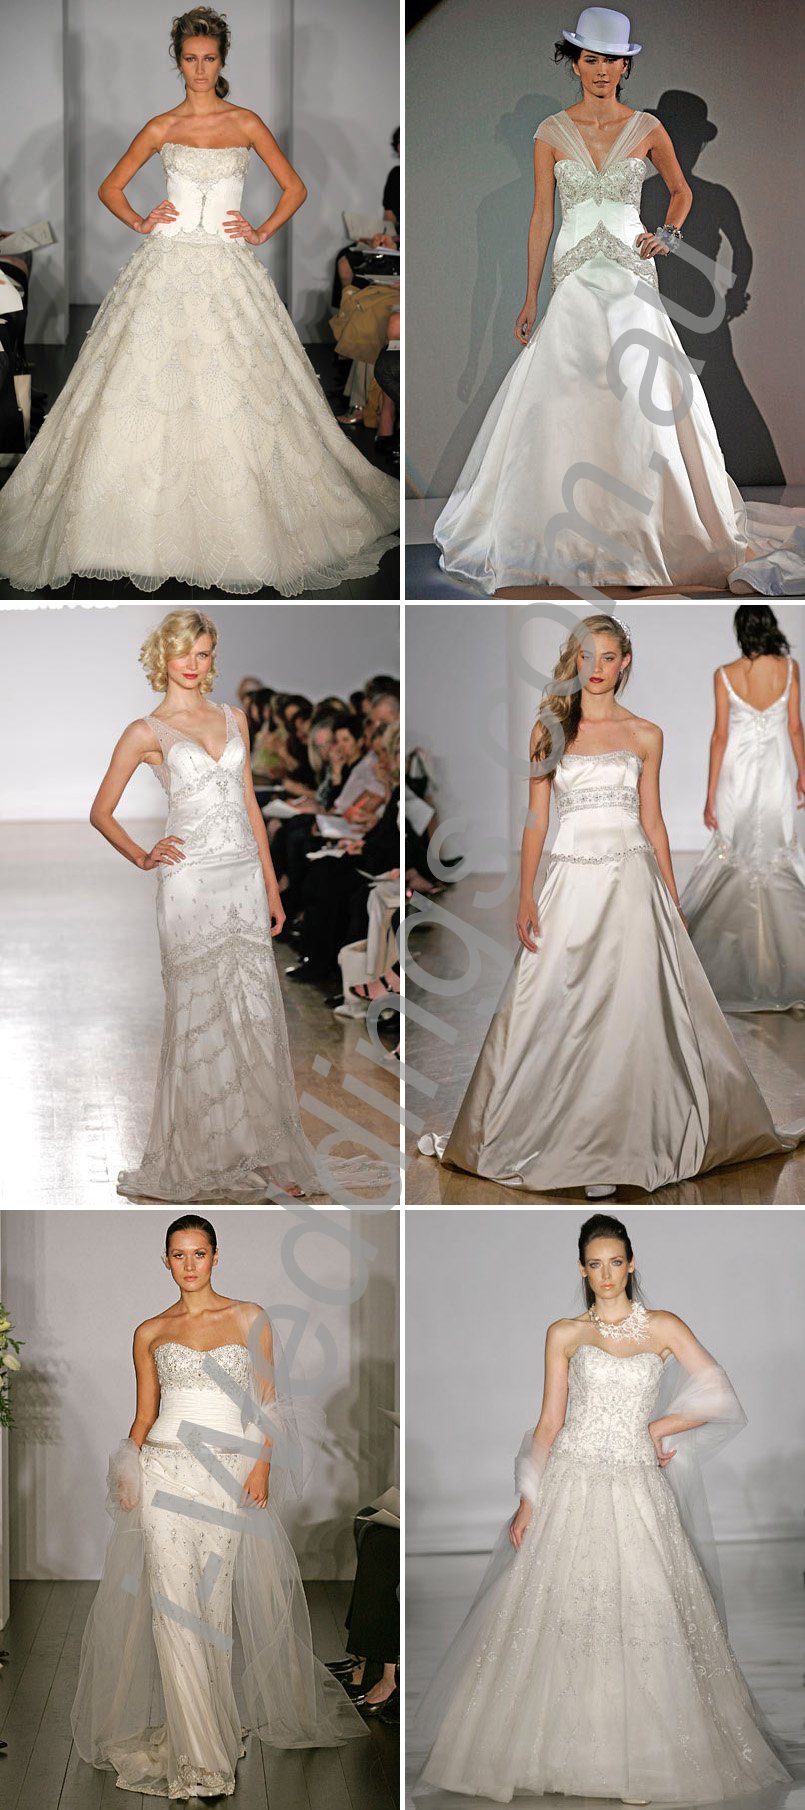 iLoveThese gowns